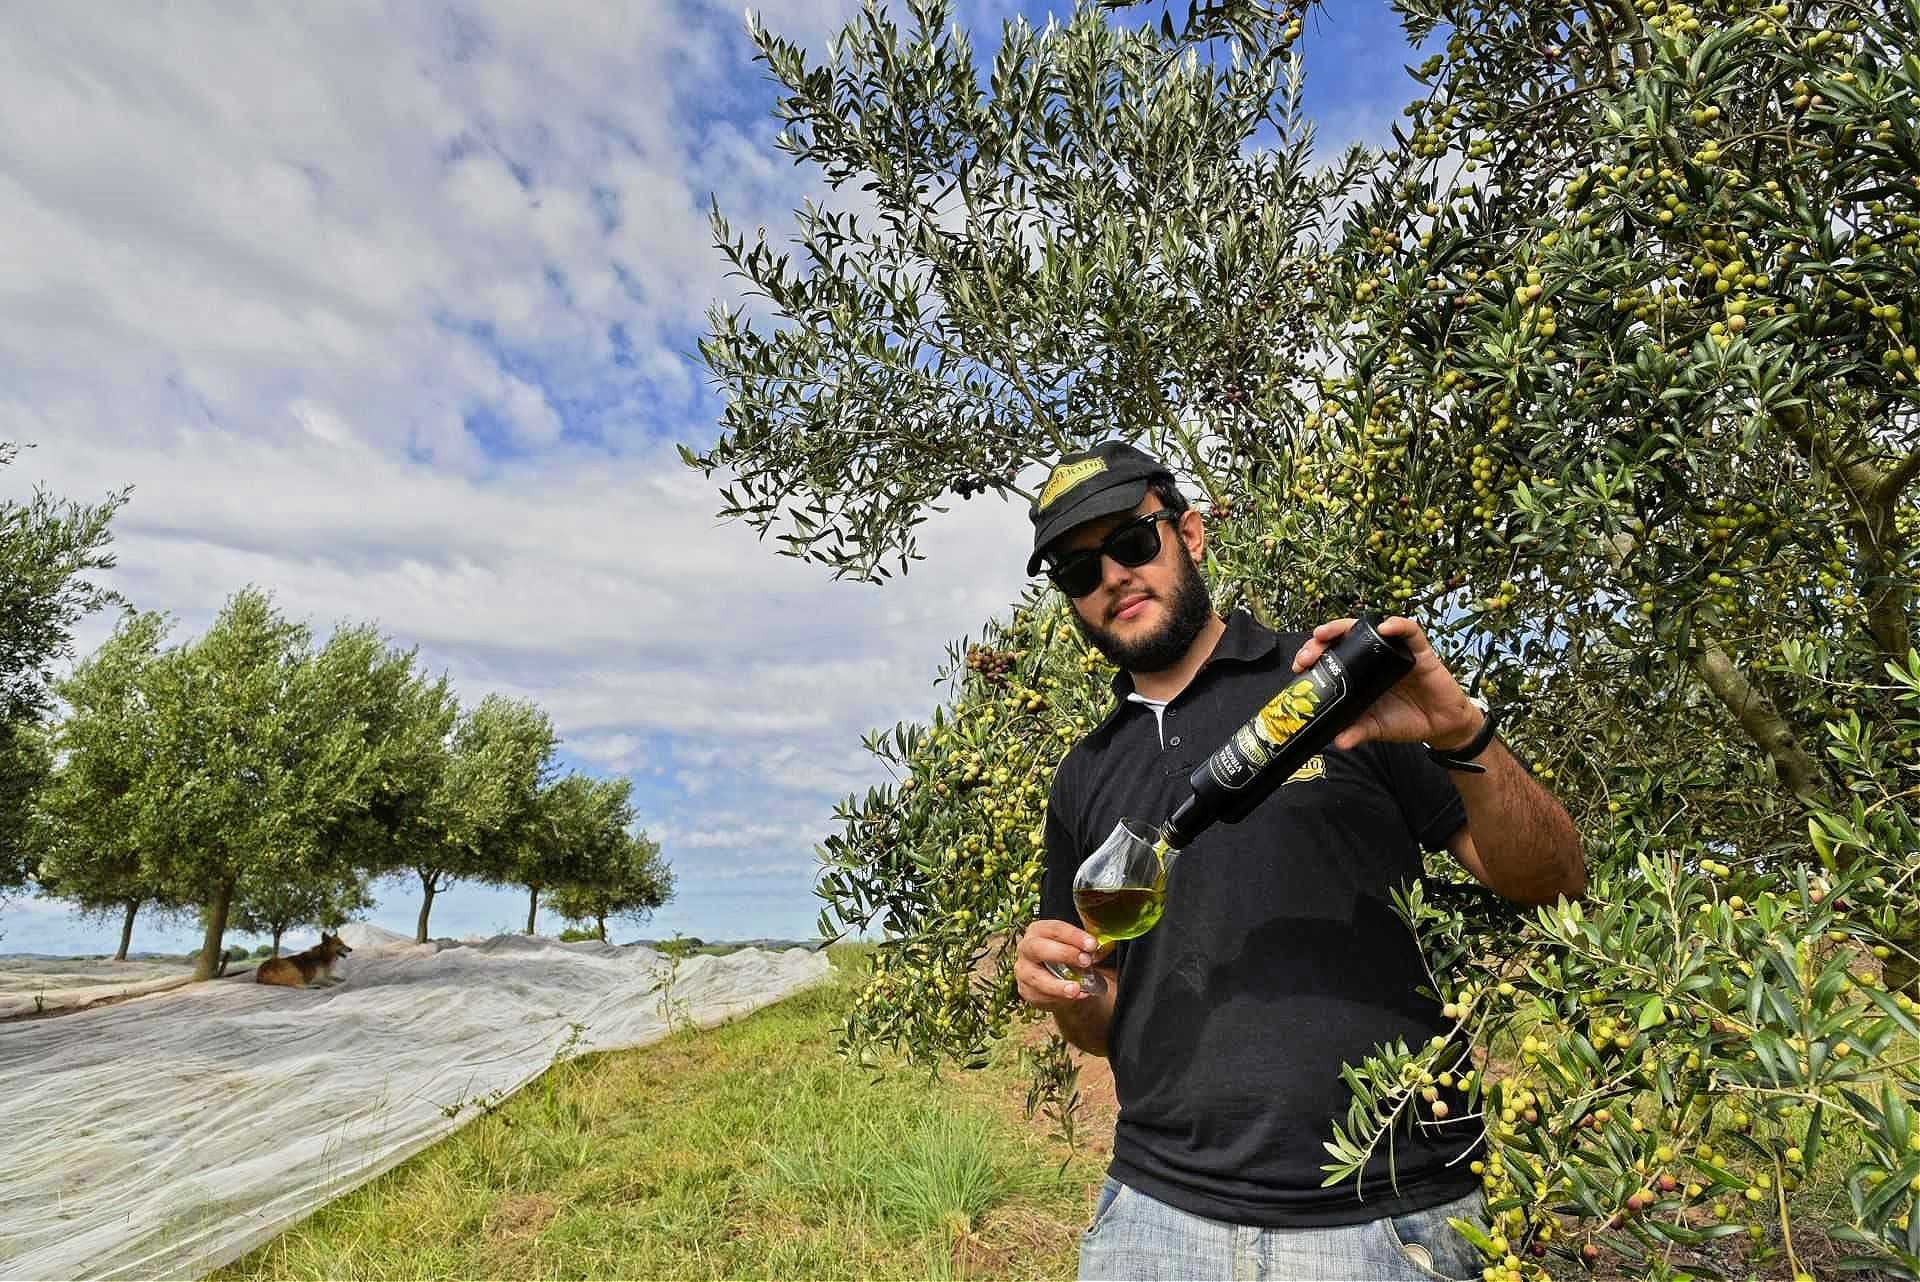 competitions-profiles-south-america-the-best-olive-oils-renewed-focus-on-quality-pays-off-for-brazilian-producers-at-2021-nyiooc-olive-oil-times